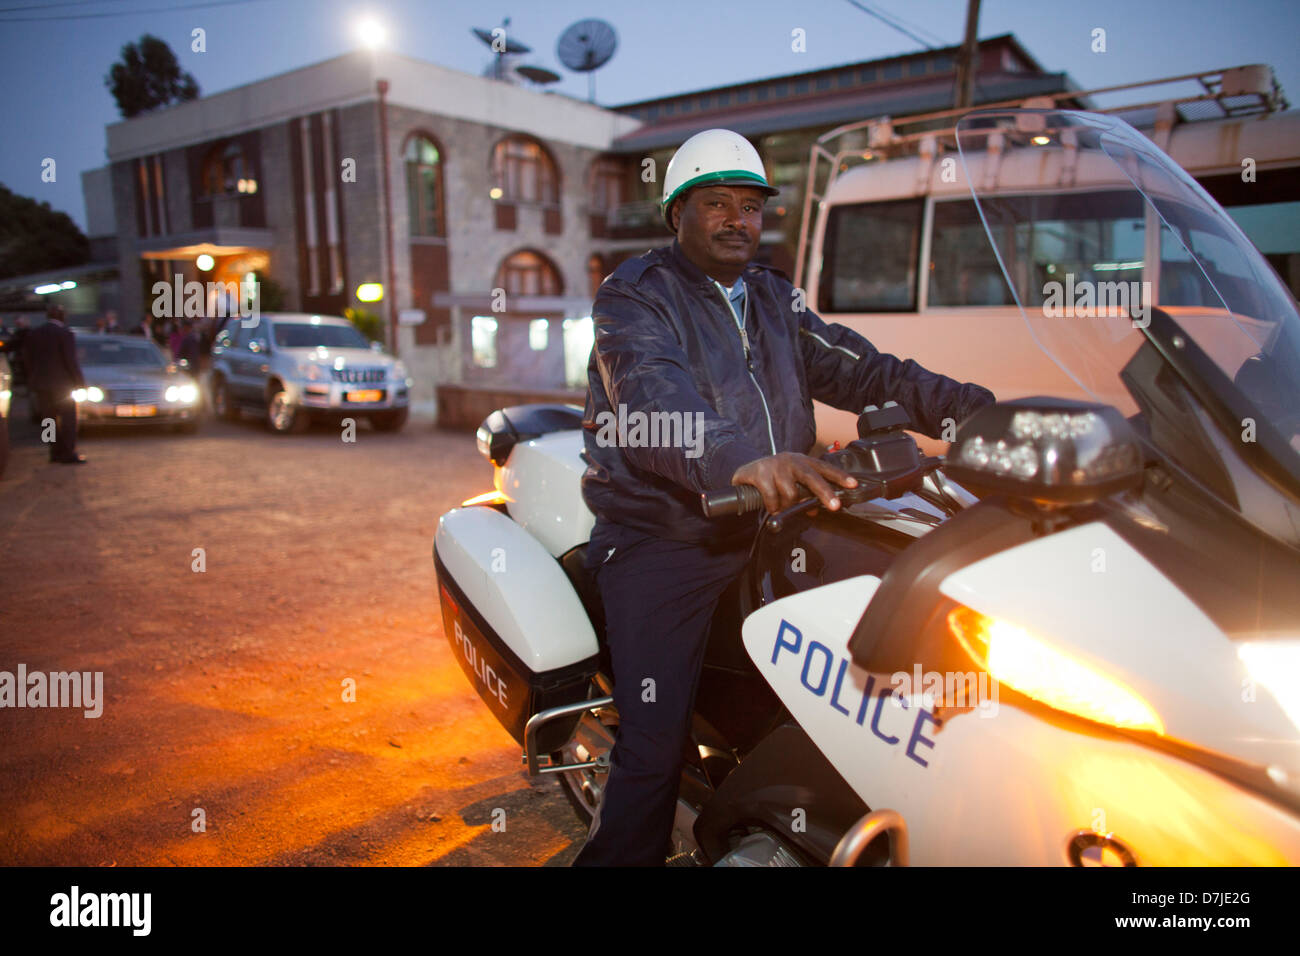 police officer on motorbike in Ethiopia Stock Photo